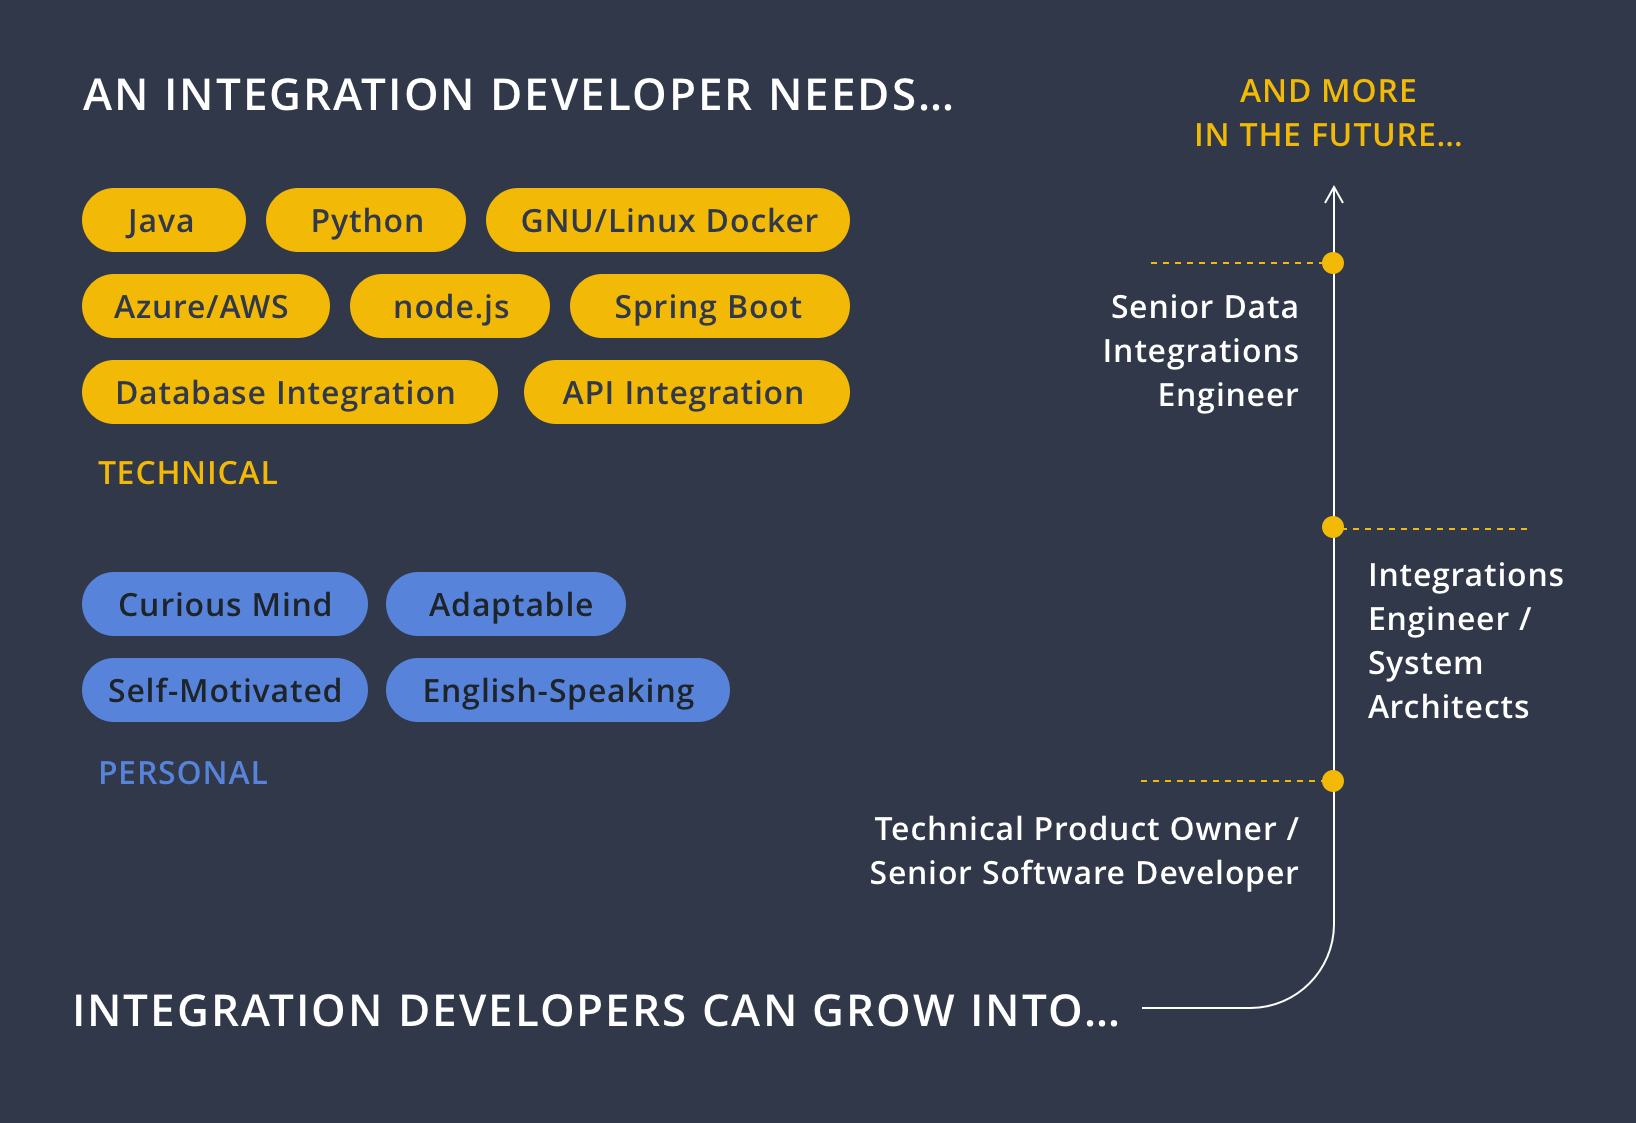 Maltego Integration Developer requirements and future prospects